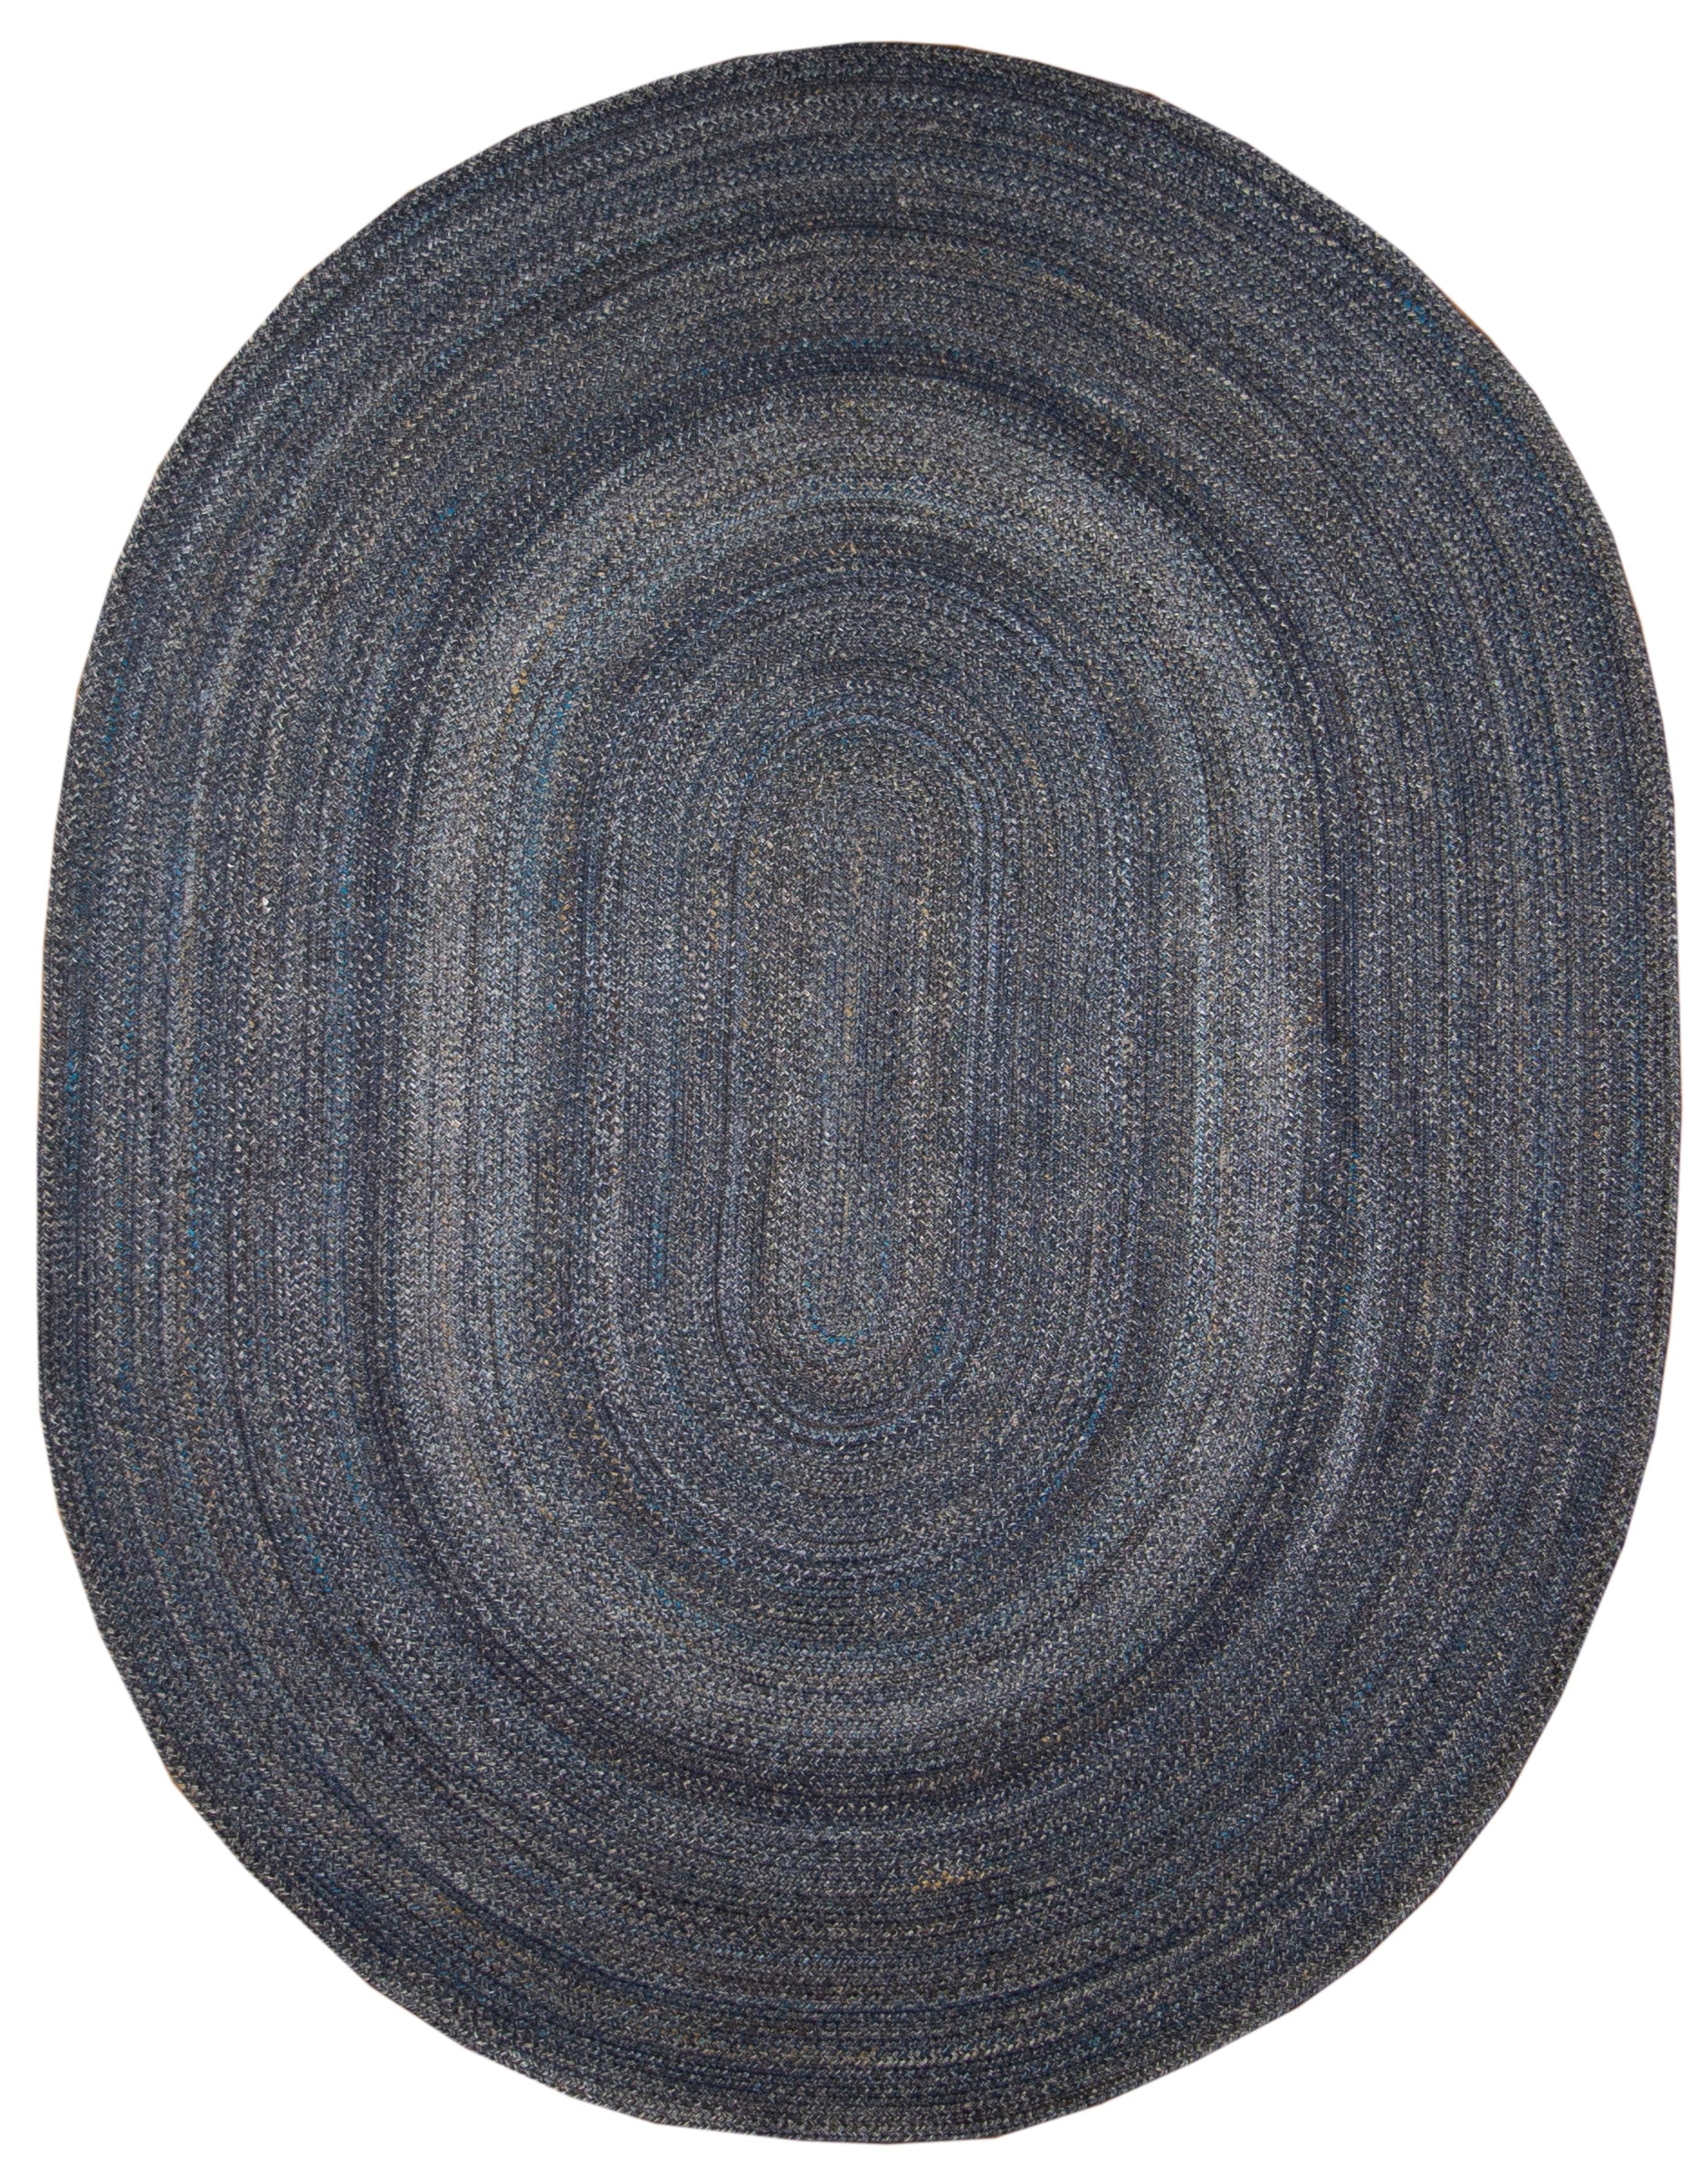 PYR1 Navy Braided Oval Rug-Area rug for living room, dining area, and bedroom